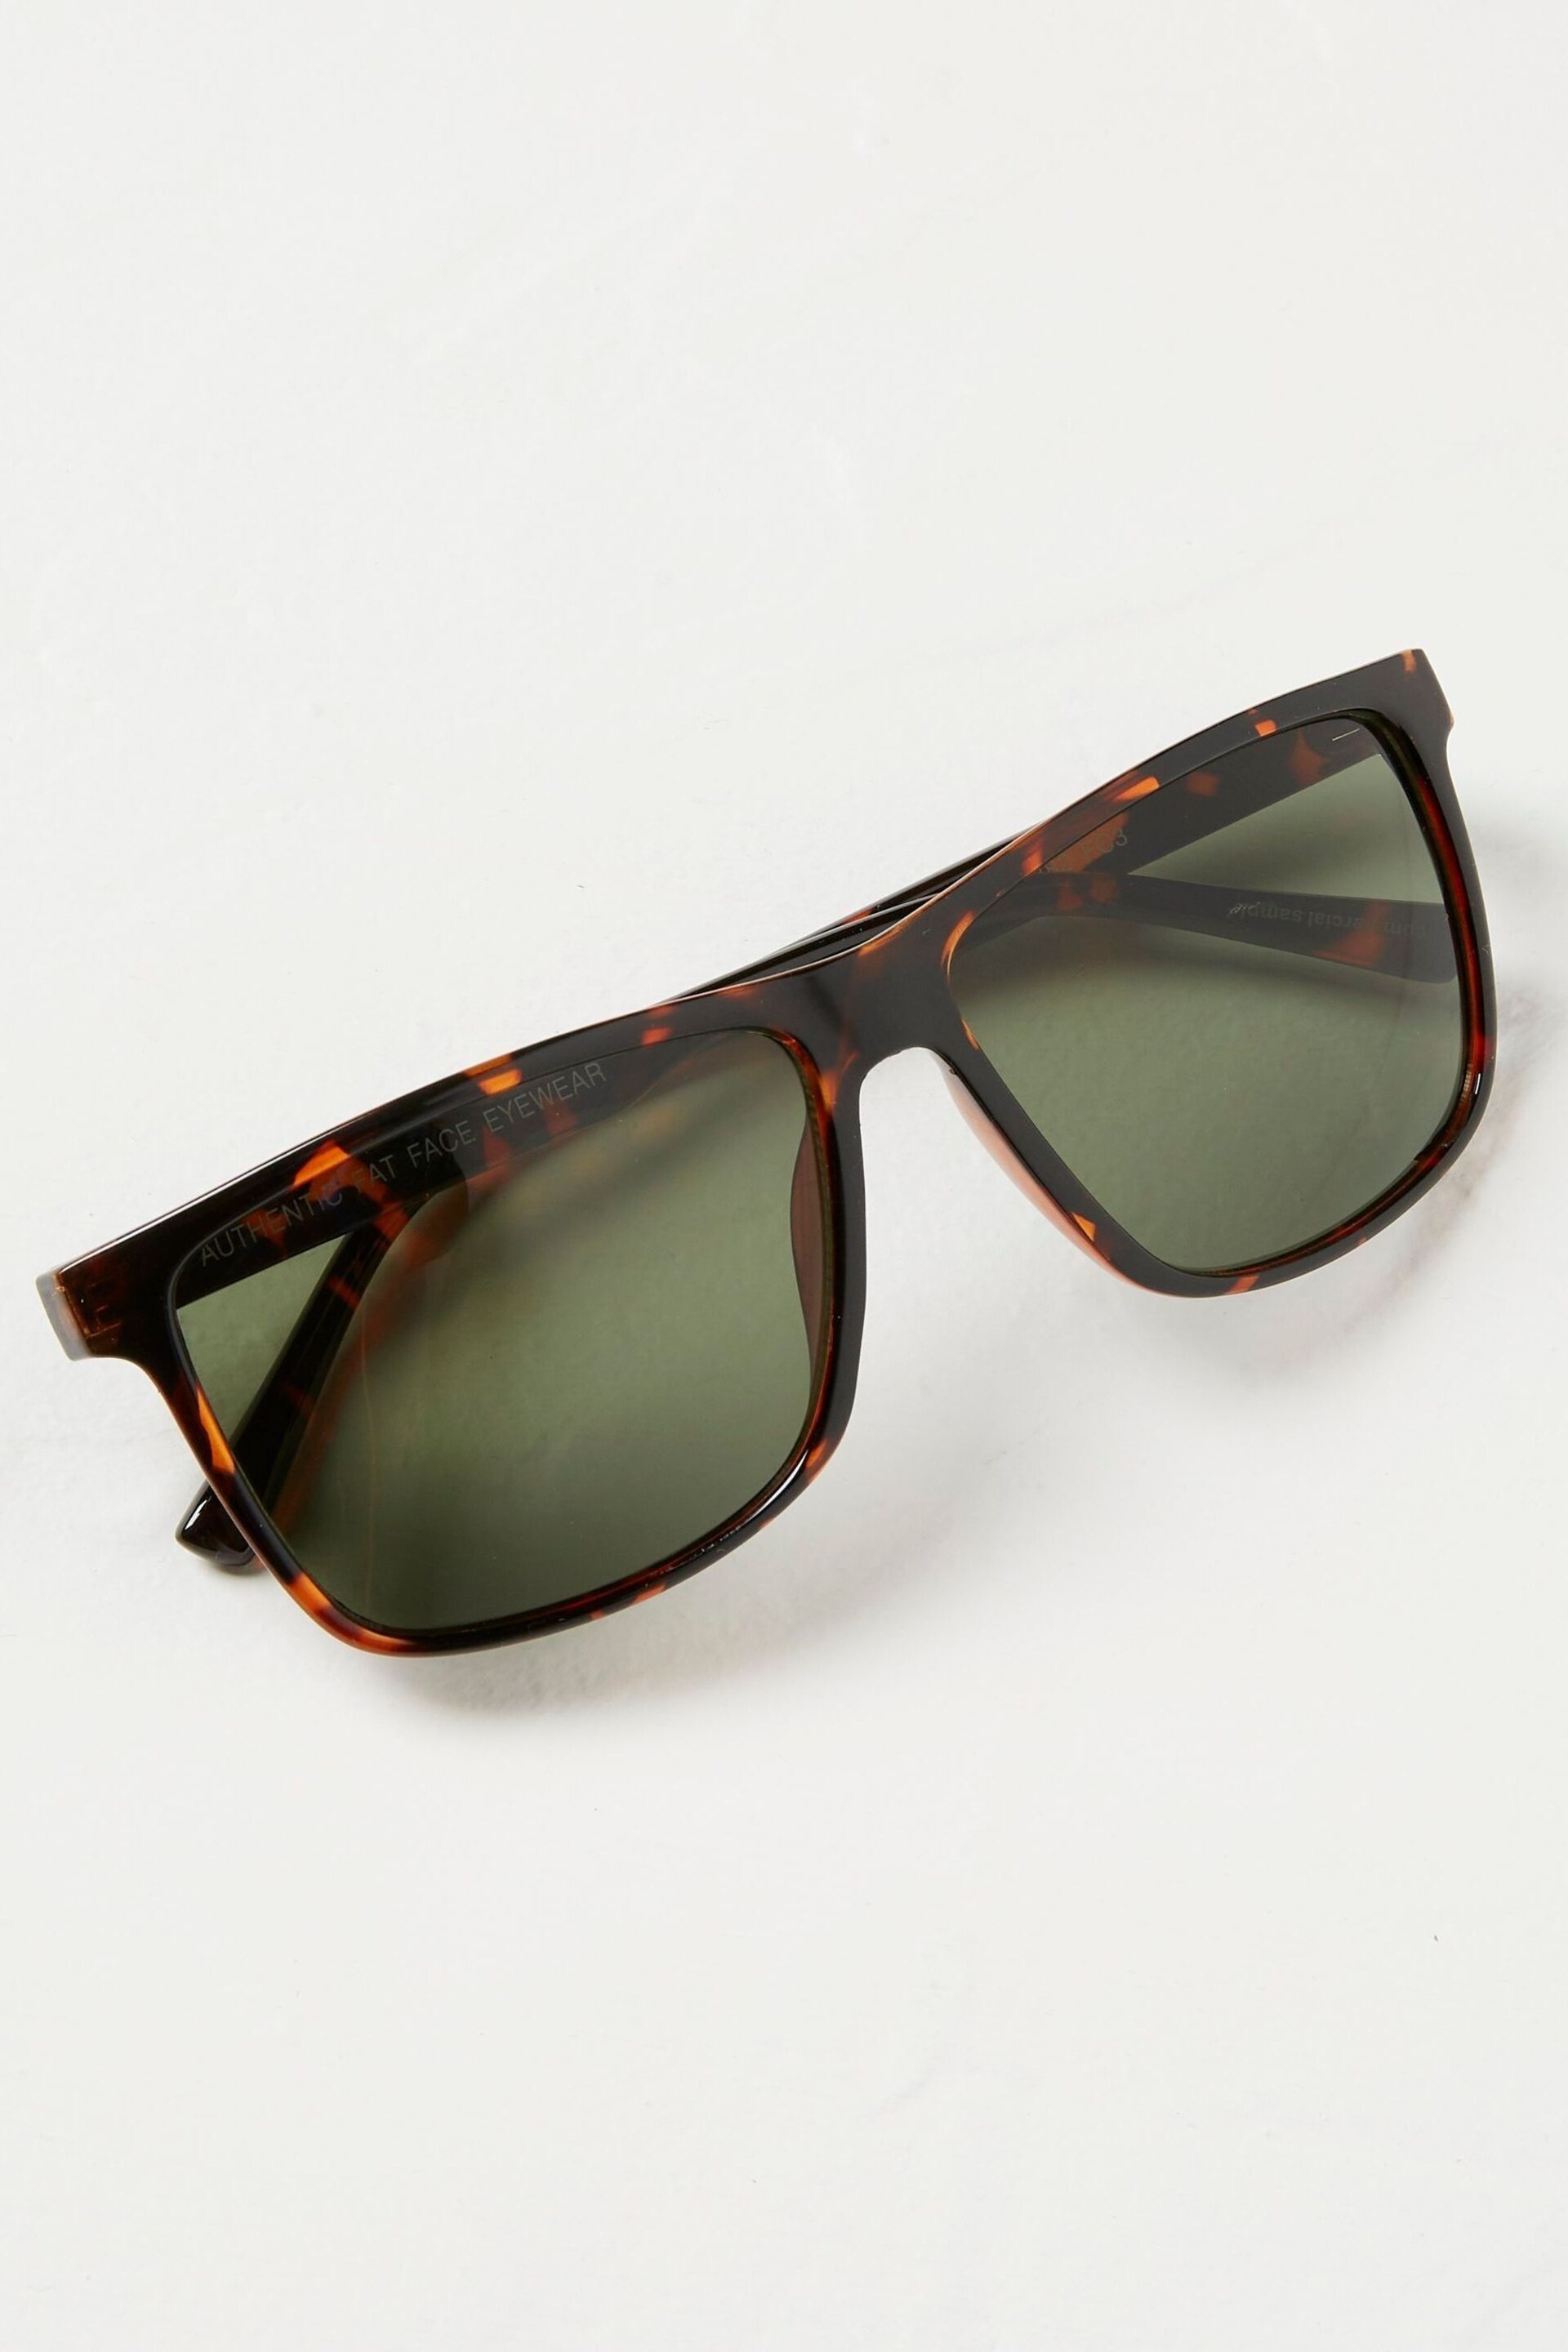 FatFace Brown Dylan Sunglasses - Image 1 of 2